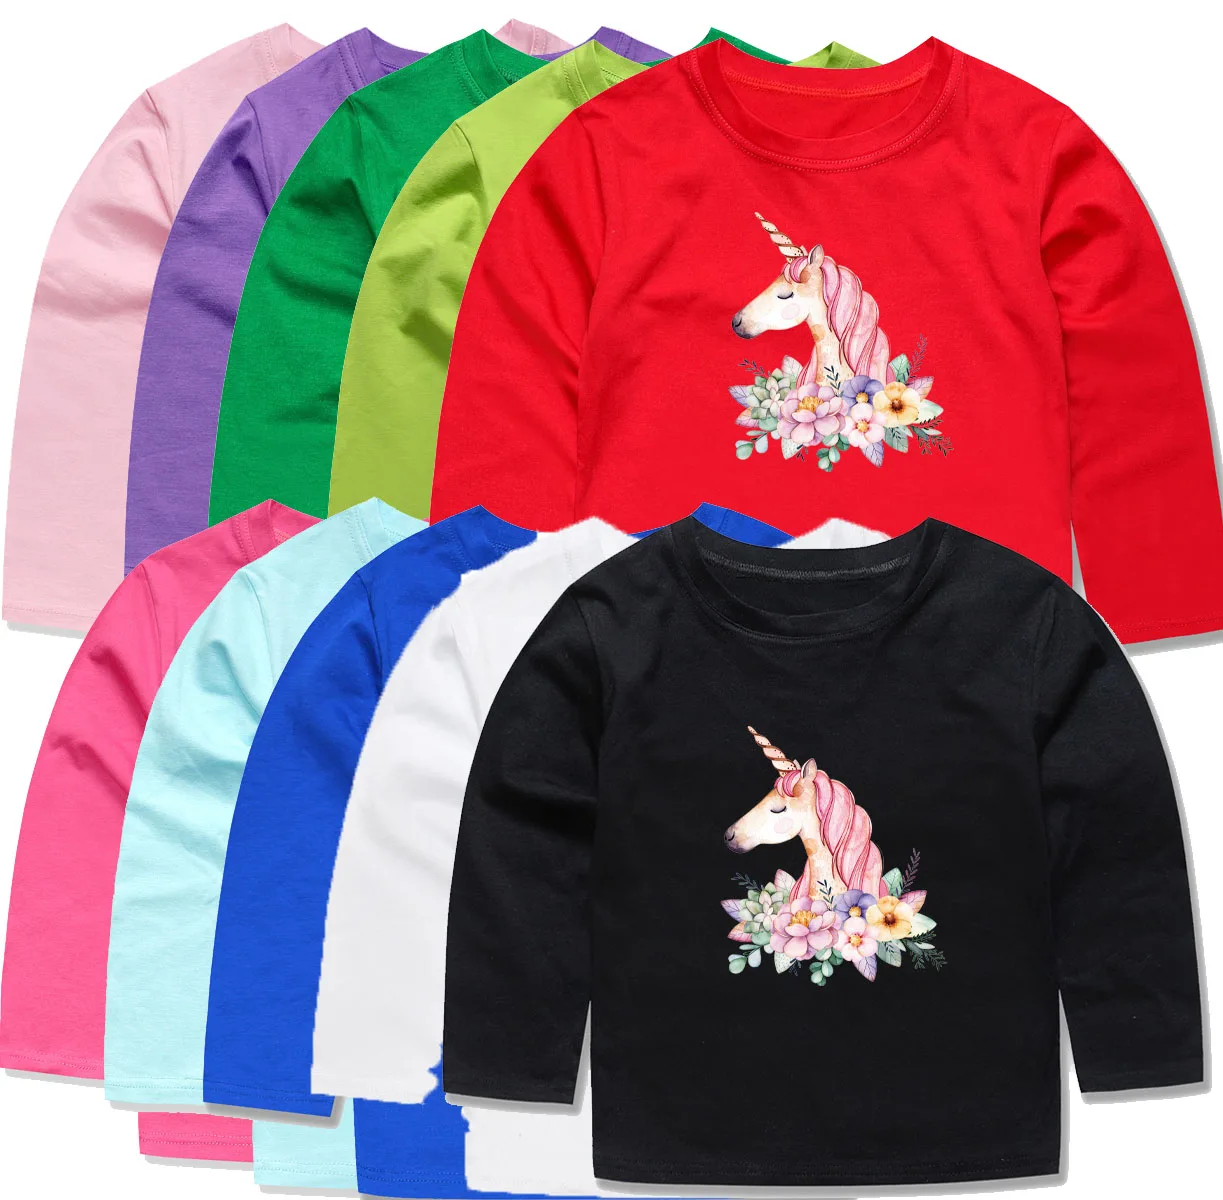 

2019 Latest Girls Full Sleeve Cotton T-shirts Children Unicorn Floral T-shirts Girls Tops Kids Tees for 2-14Years